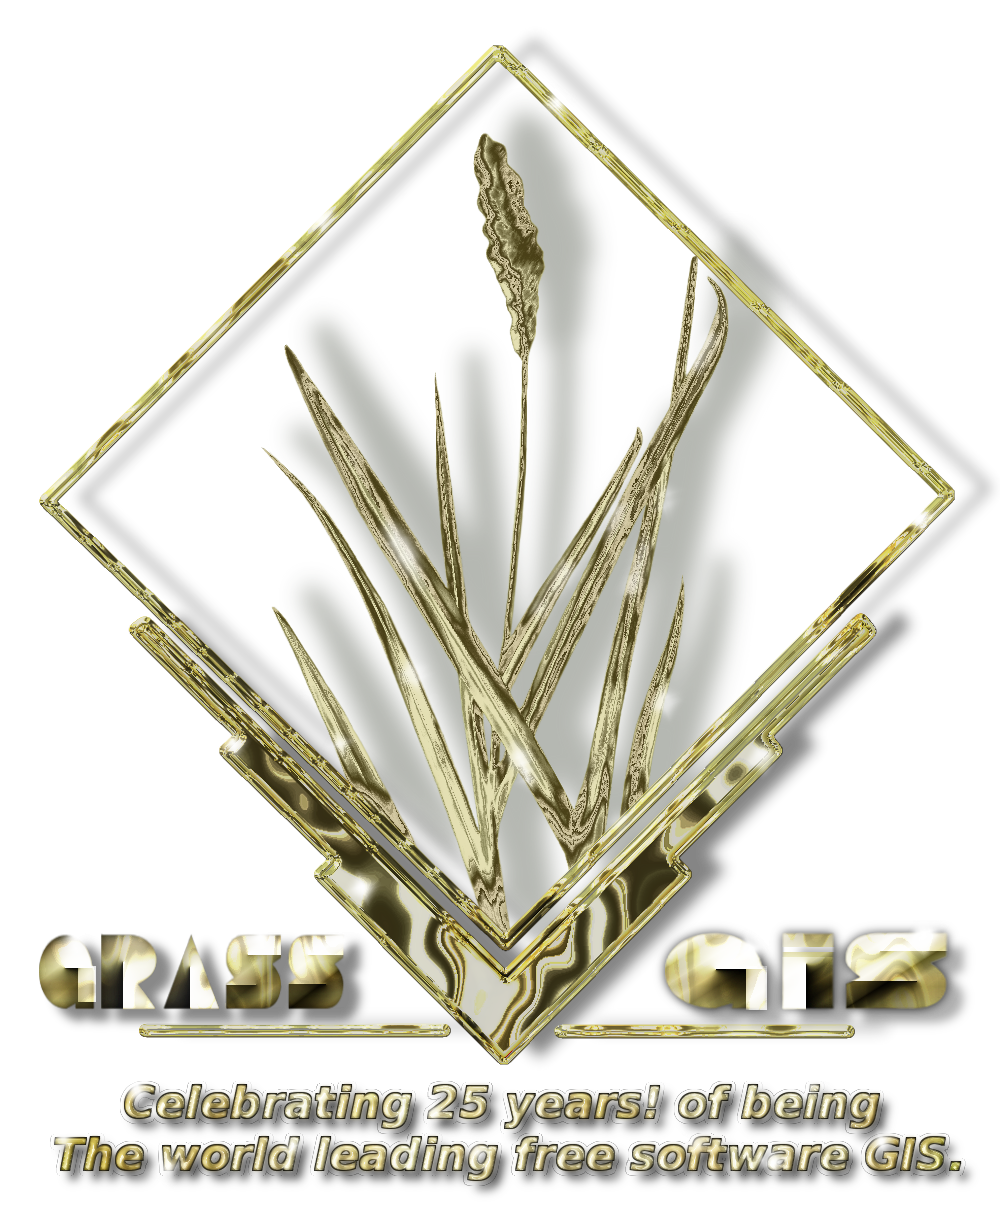 Thumbnail for File:Grass logo gold text 25yr celebration.png